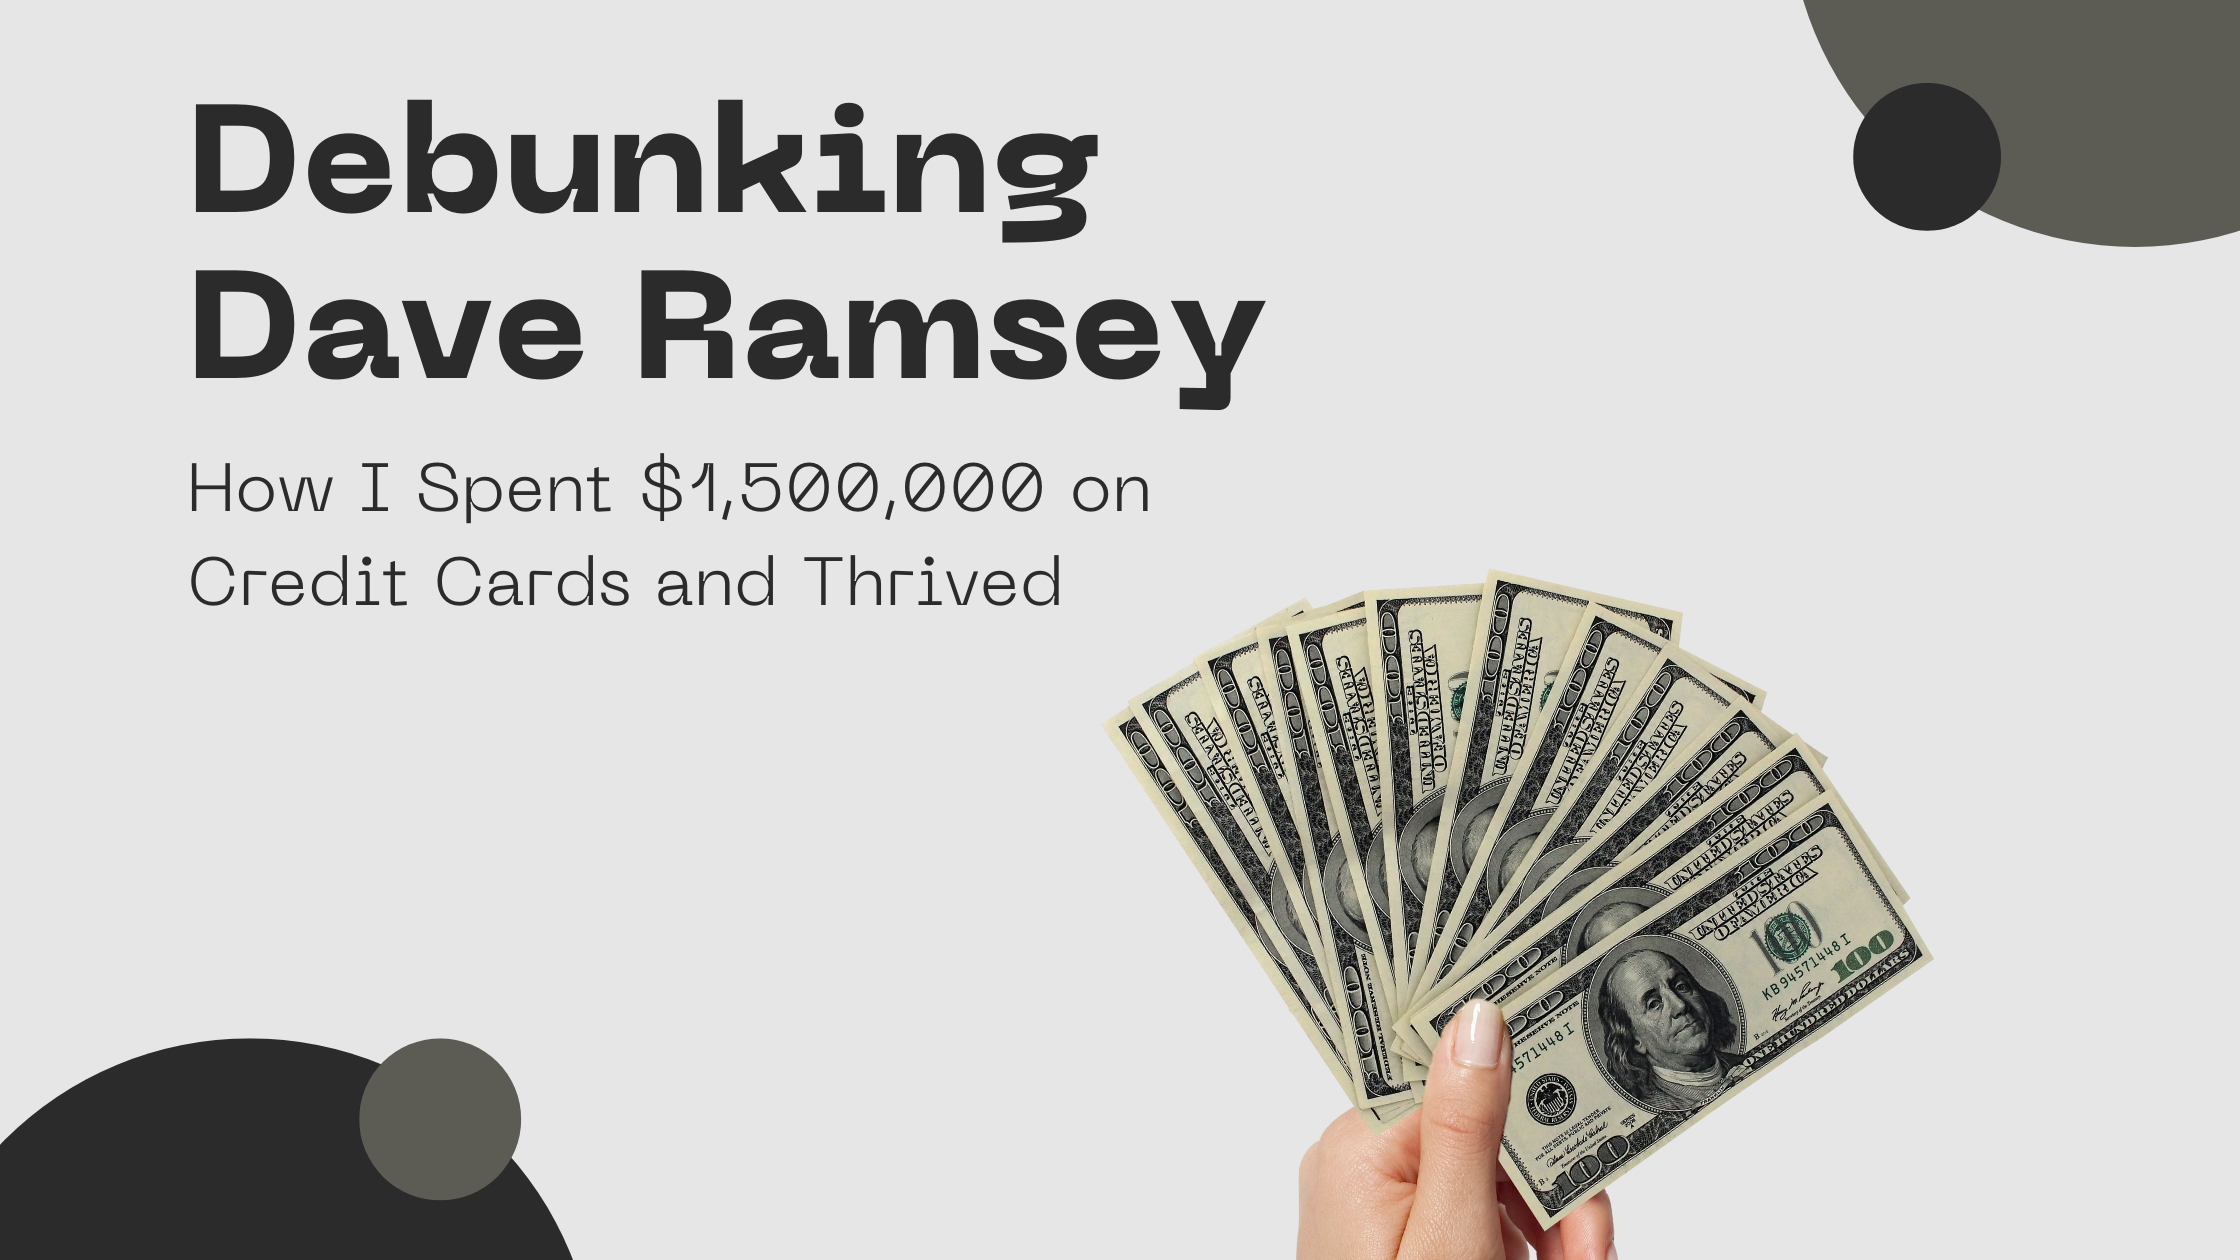 Debunking Dave Ramsey: How I Spent $1,500,000 on Credit Cards and Thrived